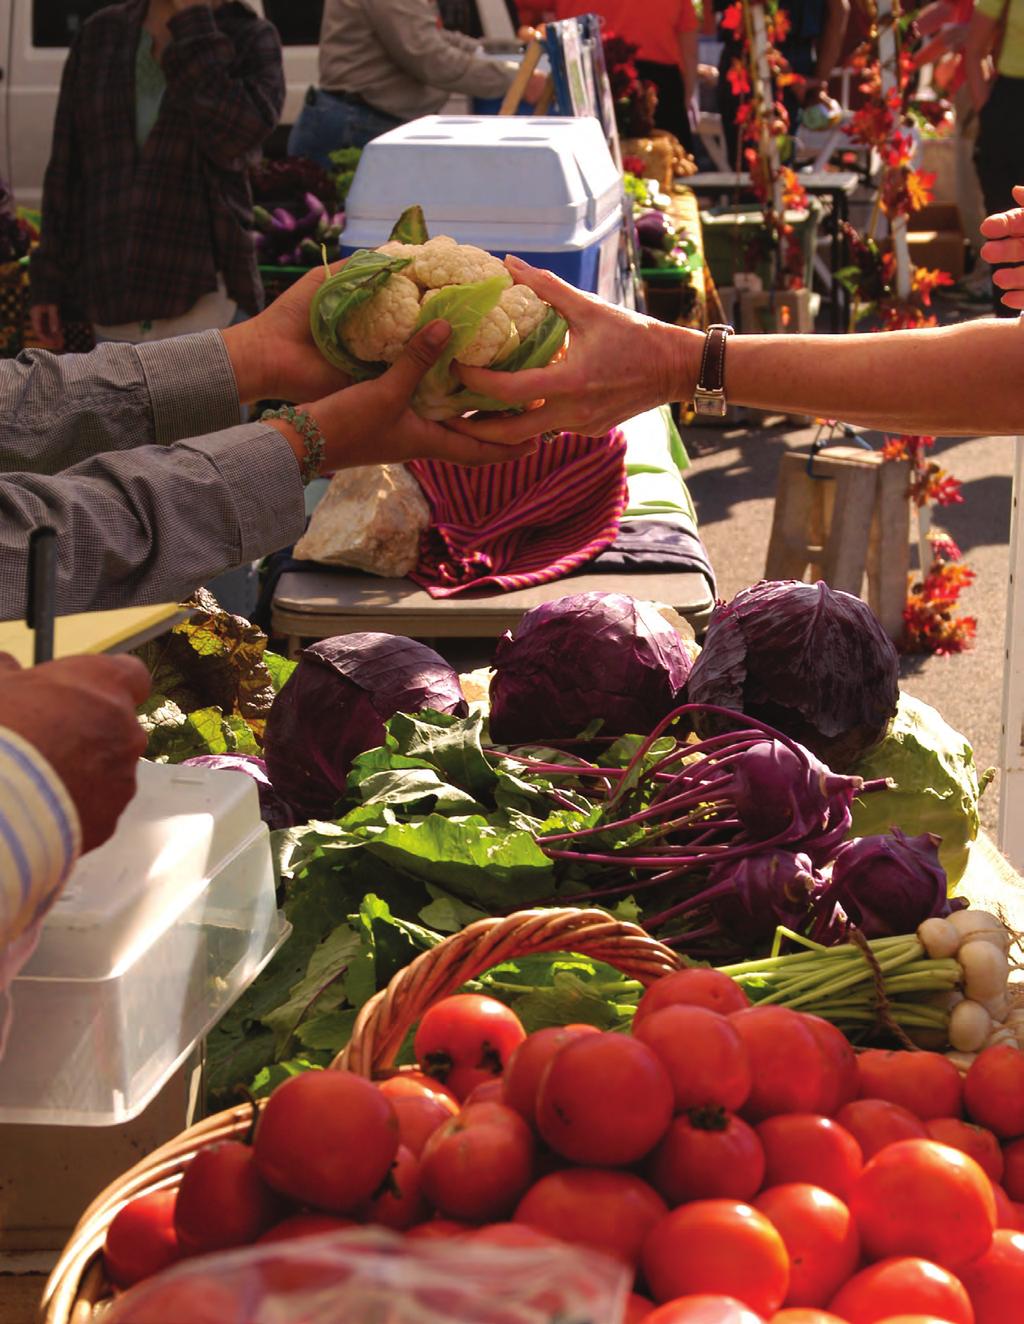 Working with the go Texan program has enabled the River Valley Farmers Market in Elgin to create and participate in events that have attracted many customers to the market over the years.